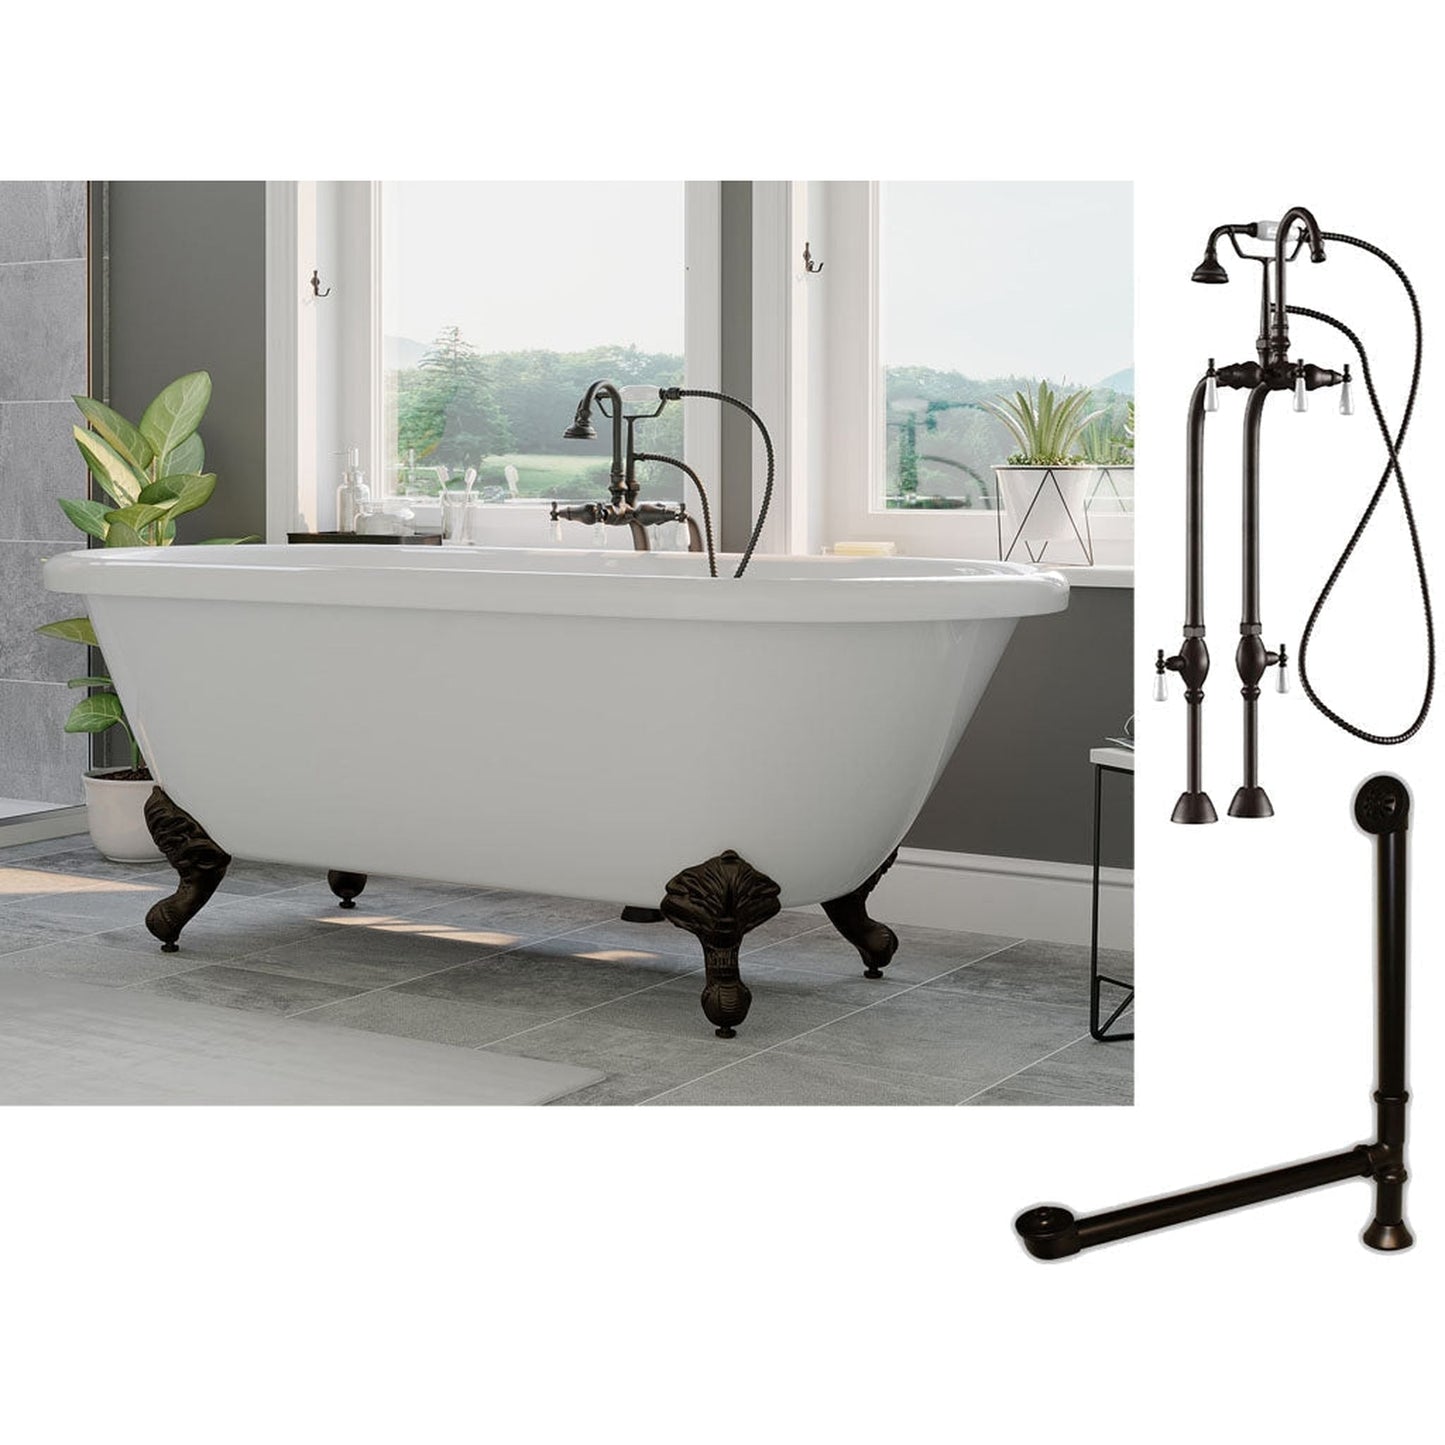 Cambridge Plumbing 70" White Acrylic Double Ended Clawfoot Bathtub With No Deck Holes And Complete Plumbing Package Including Freestanding English Telephone Gooseneck Faucet, Drain And Overflow Assembly In Oil Rubbed Bronze